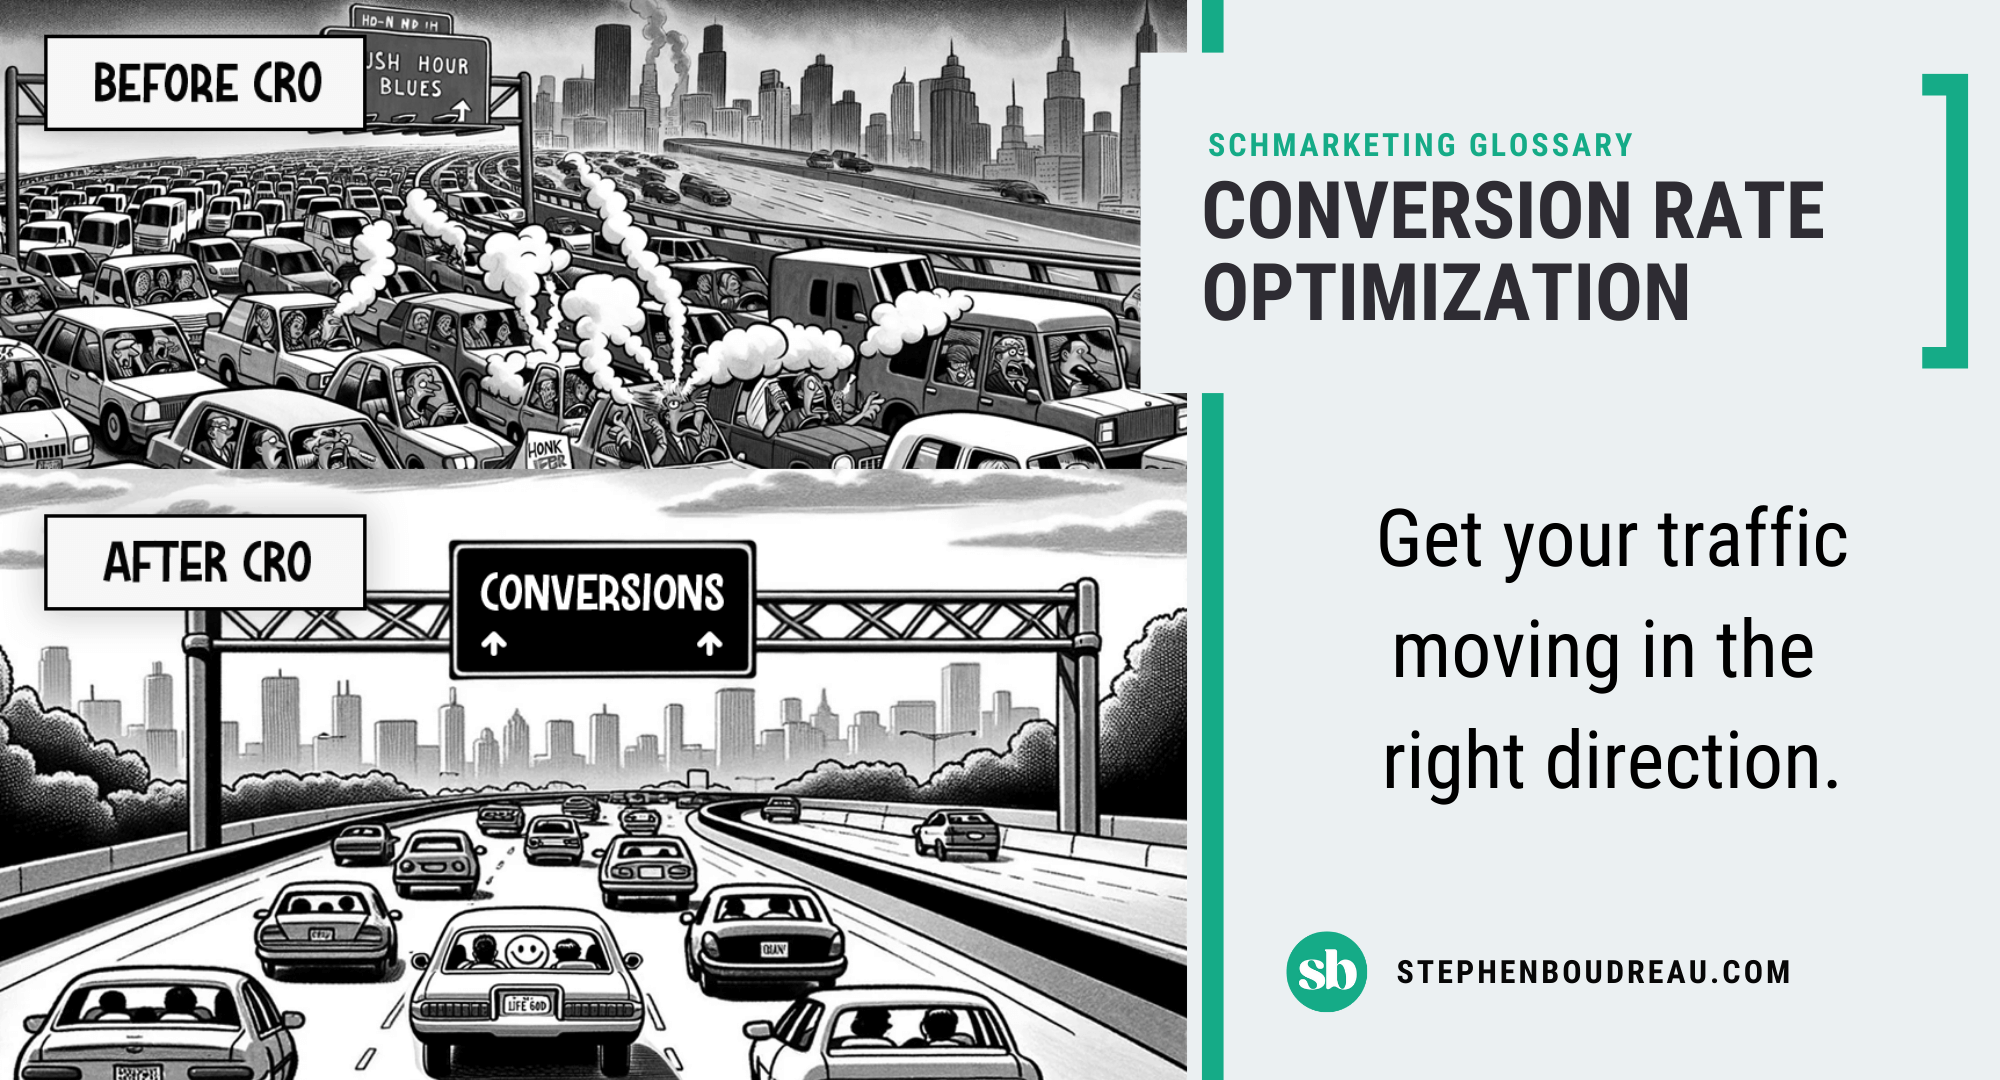 Schmarketing: Get your traffic moving in the right direction.